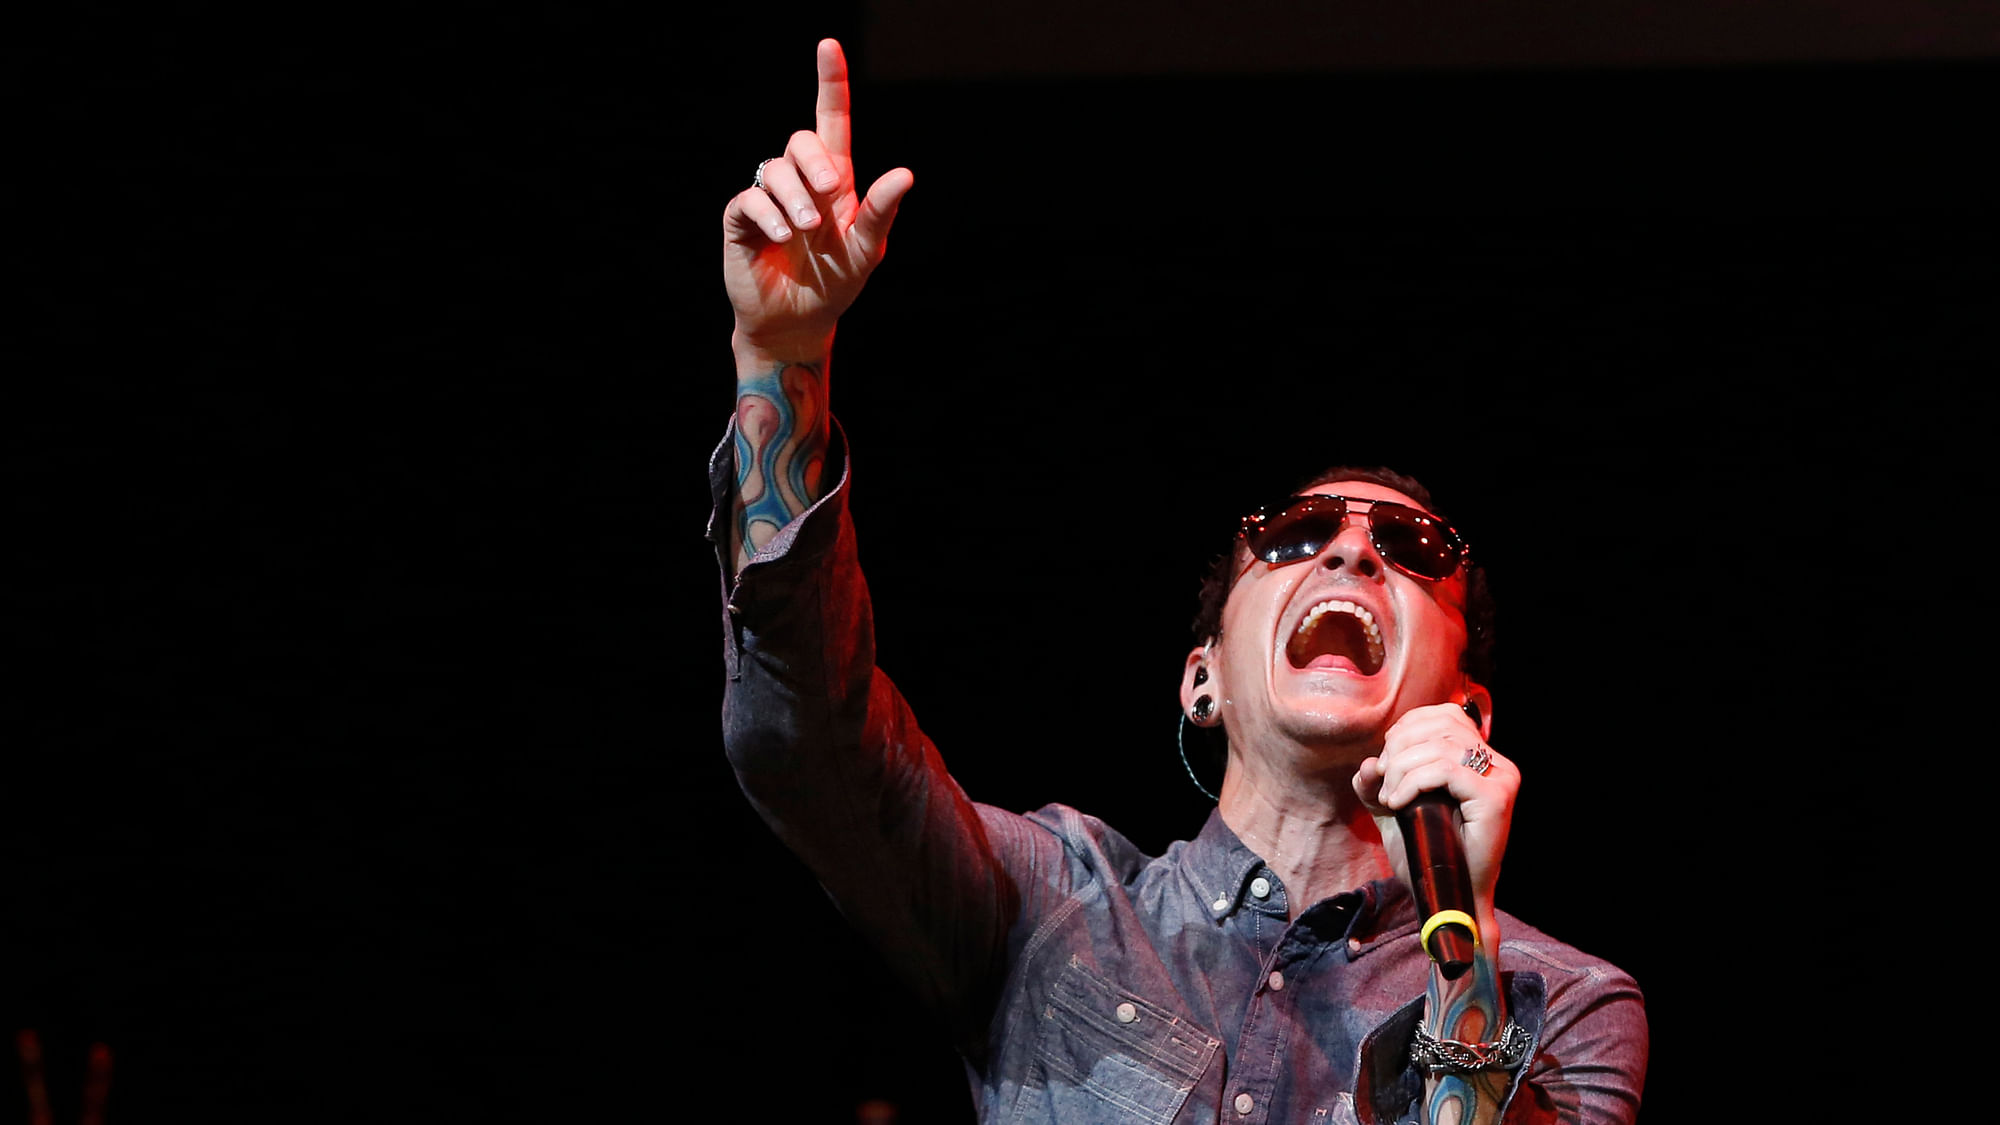 Lead vocalist of Linkin Park Chester Bennington performs with Stone Temple Pilots at 9th annual MusiCares MAP Fund Benefit concert in Los Angeles, California May 30, 2013.